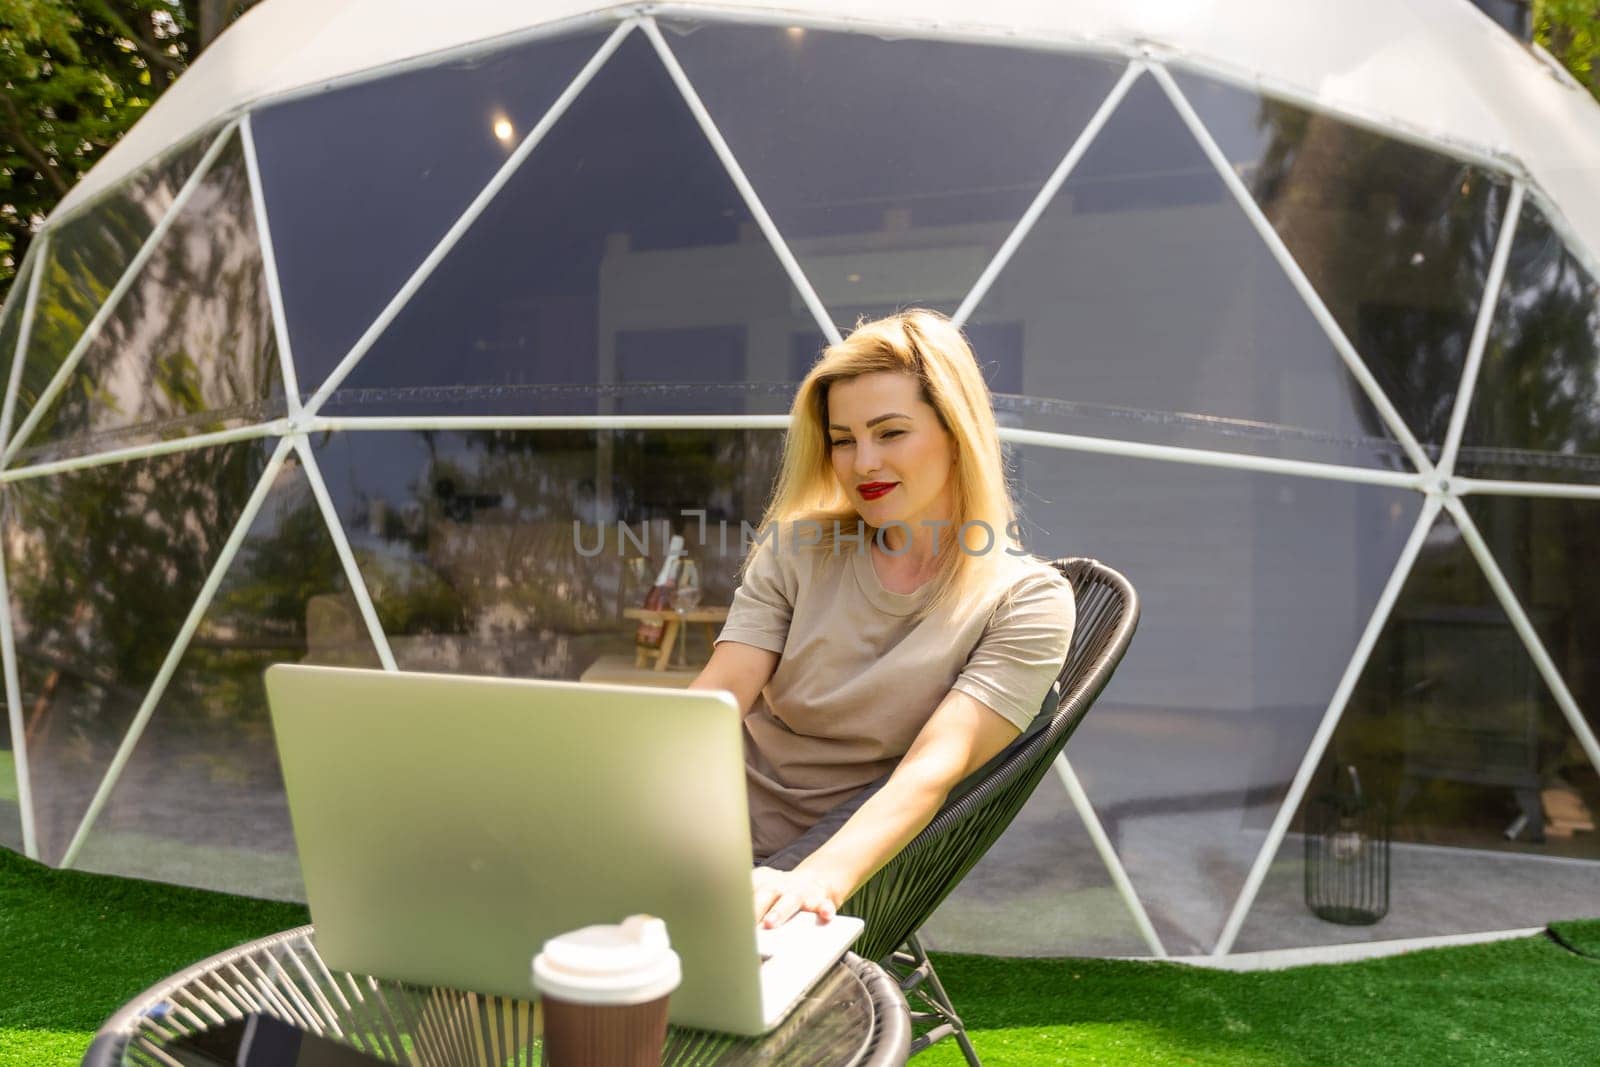 woman working on laptop Outdoor Bubble Tent House Dome - Nature travel Concept